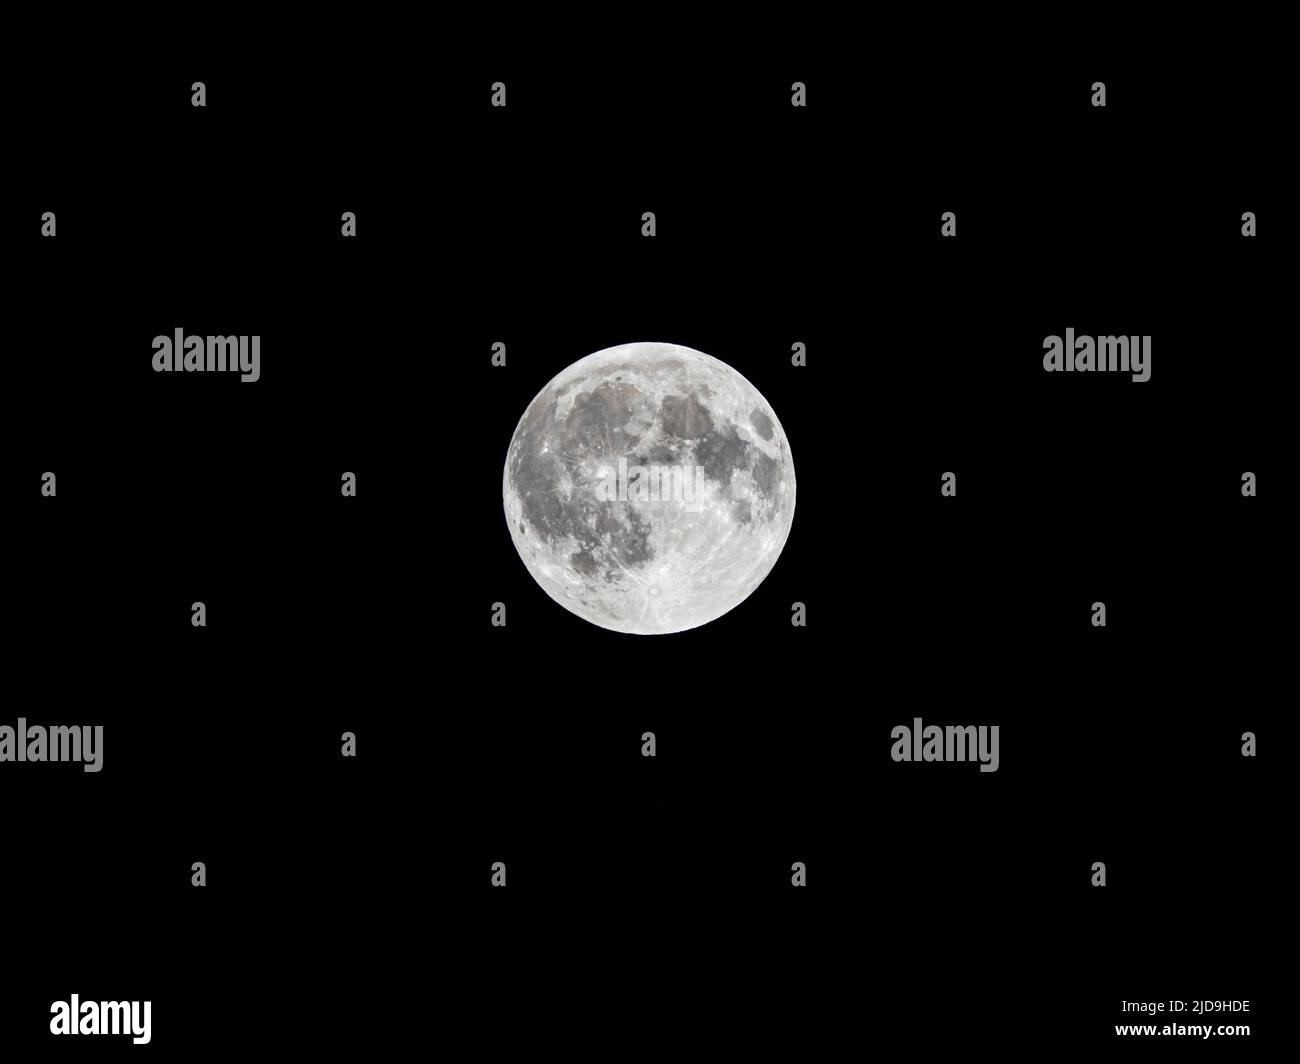 Full moon on black background. This surface texture is clearly visible from a location in middle Europe. The night sky is pitch black. Stock Photo